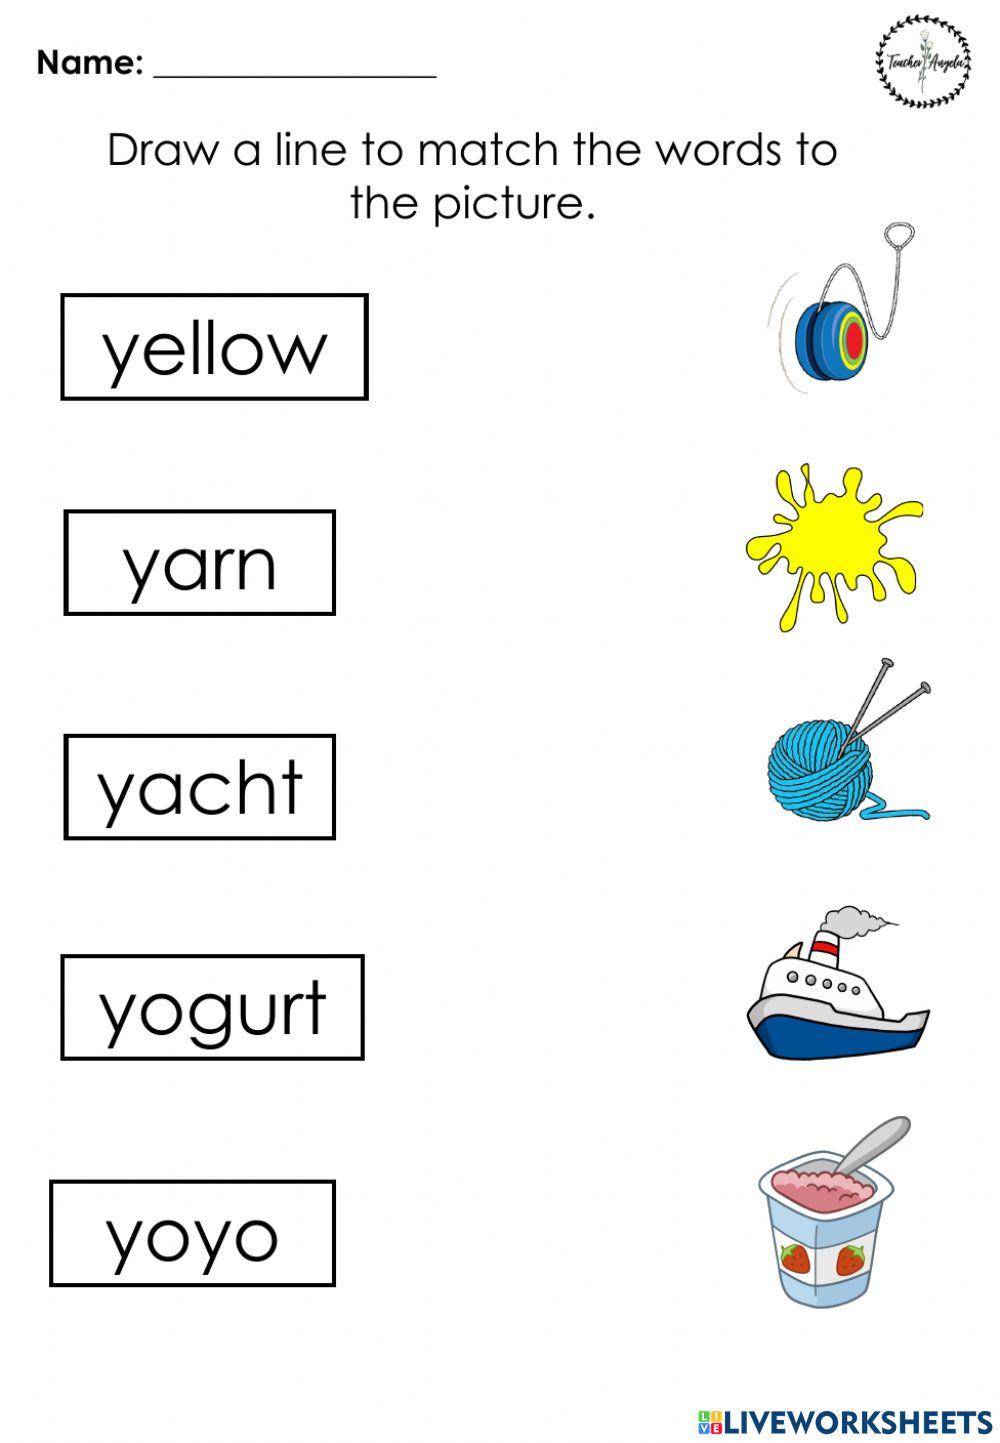 Letter Y - Matching